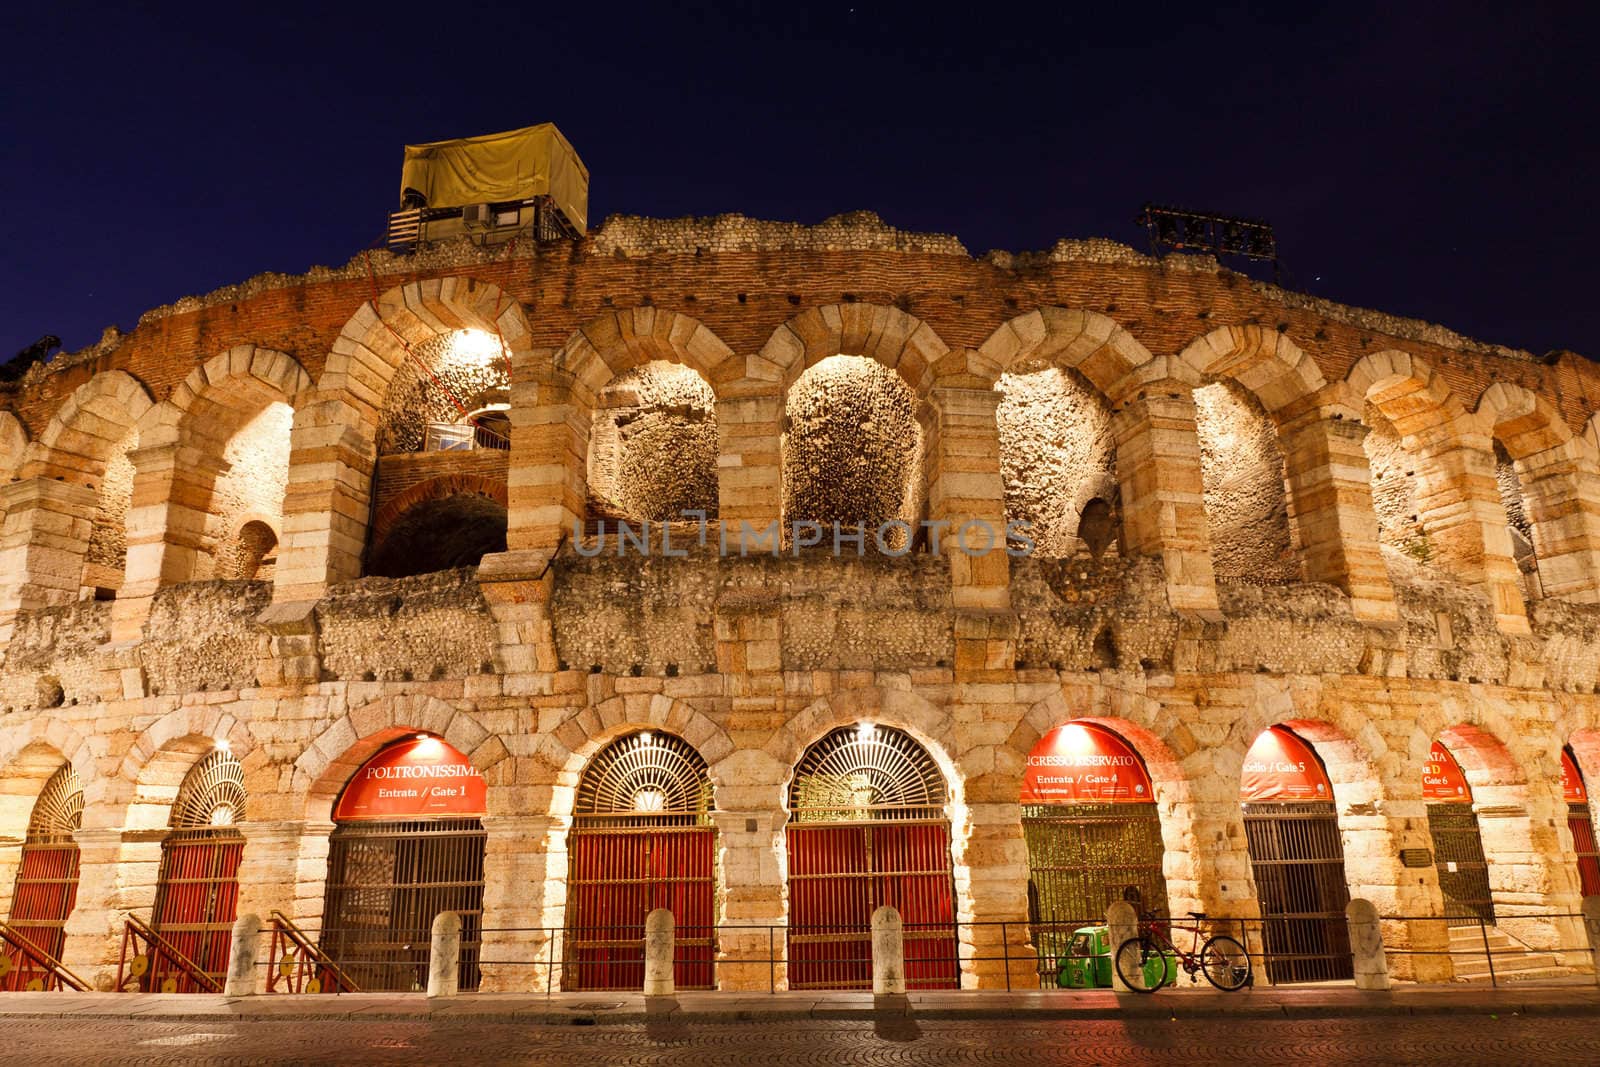 Ancient Amphitheater on Piazza Bra in Verona, Italy